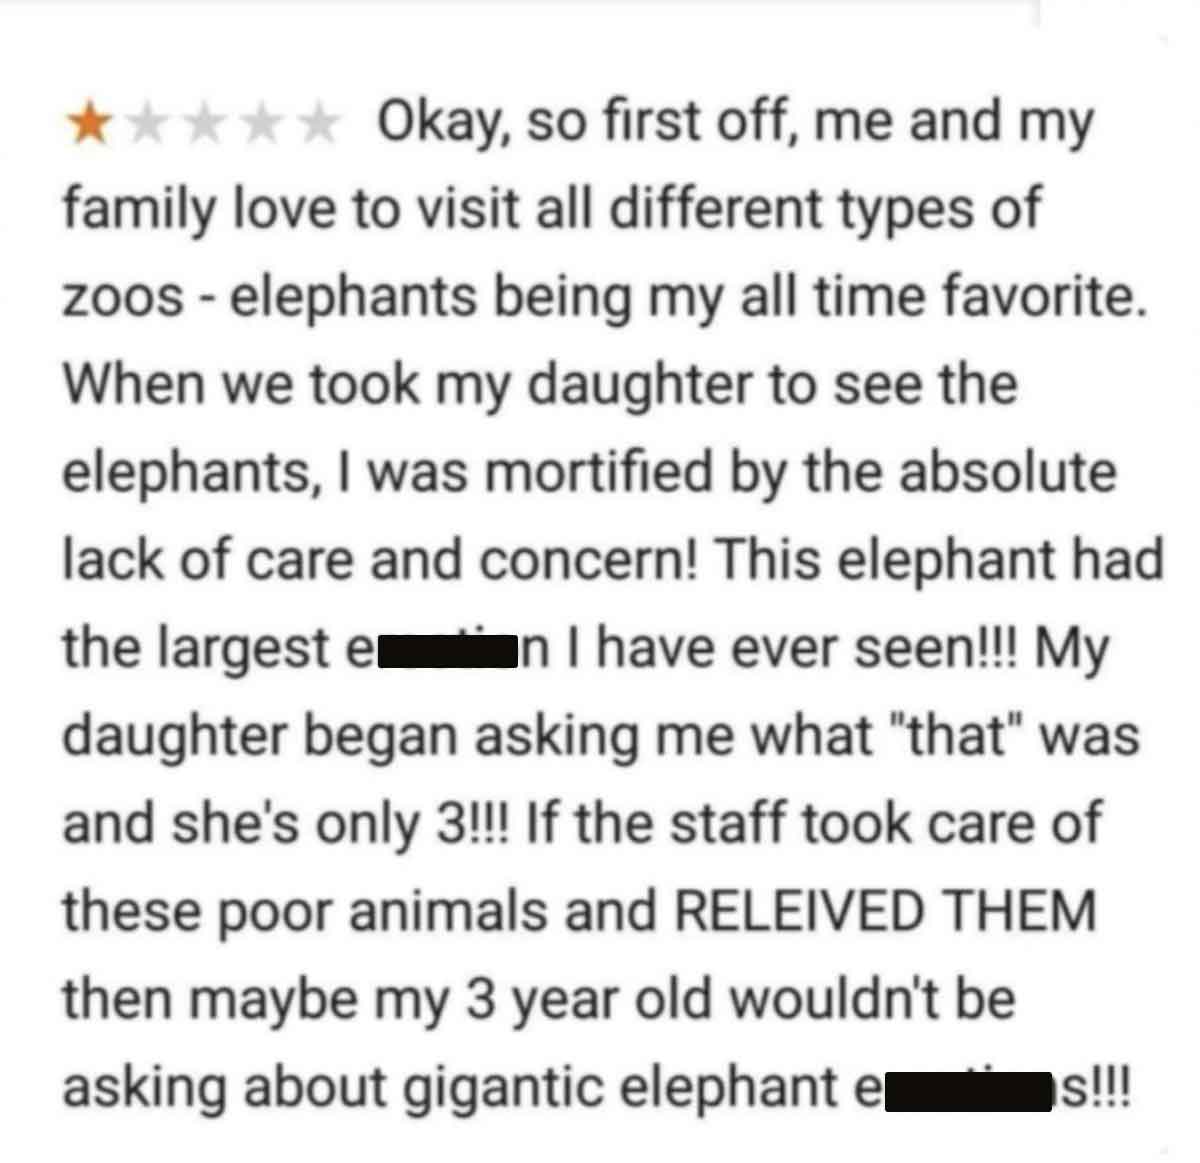 handwriting - Okay, so first off, me and my family love to visit all different types of zoos elephants being my all time favorite. When we took my daughter to see the elephants, I was mortified by the absolute lack of care and concern! This elephant had t